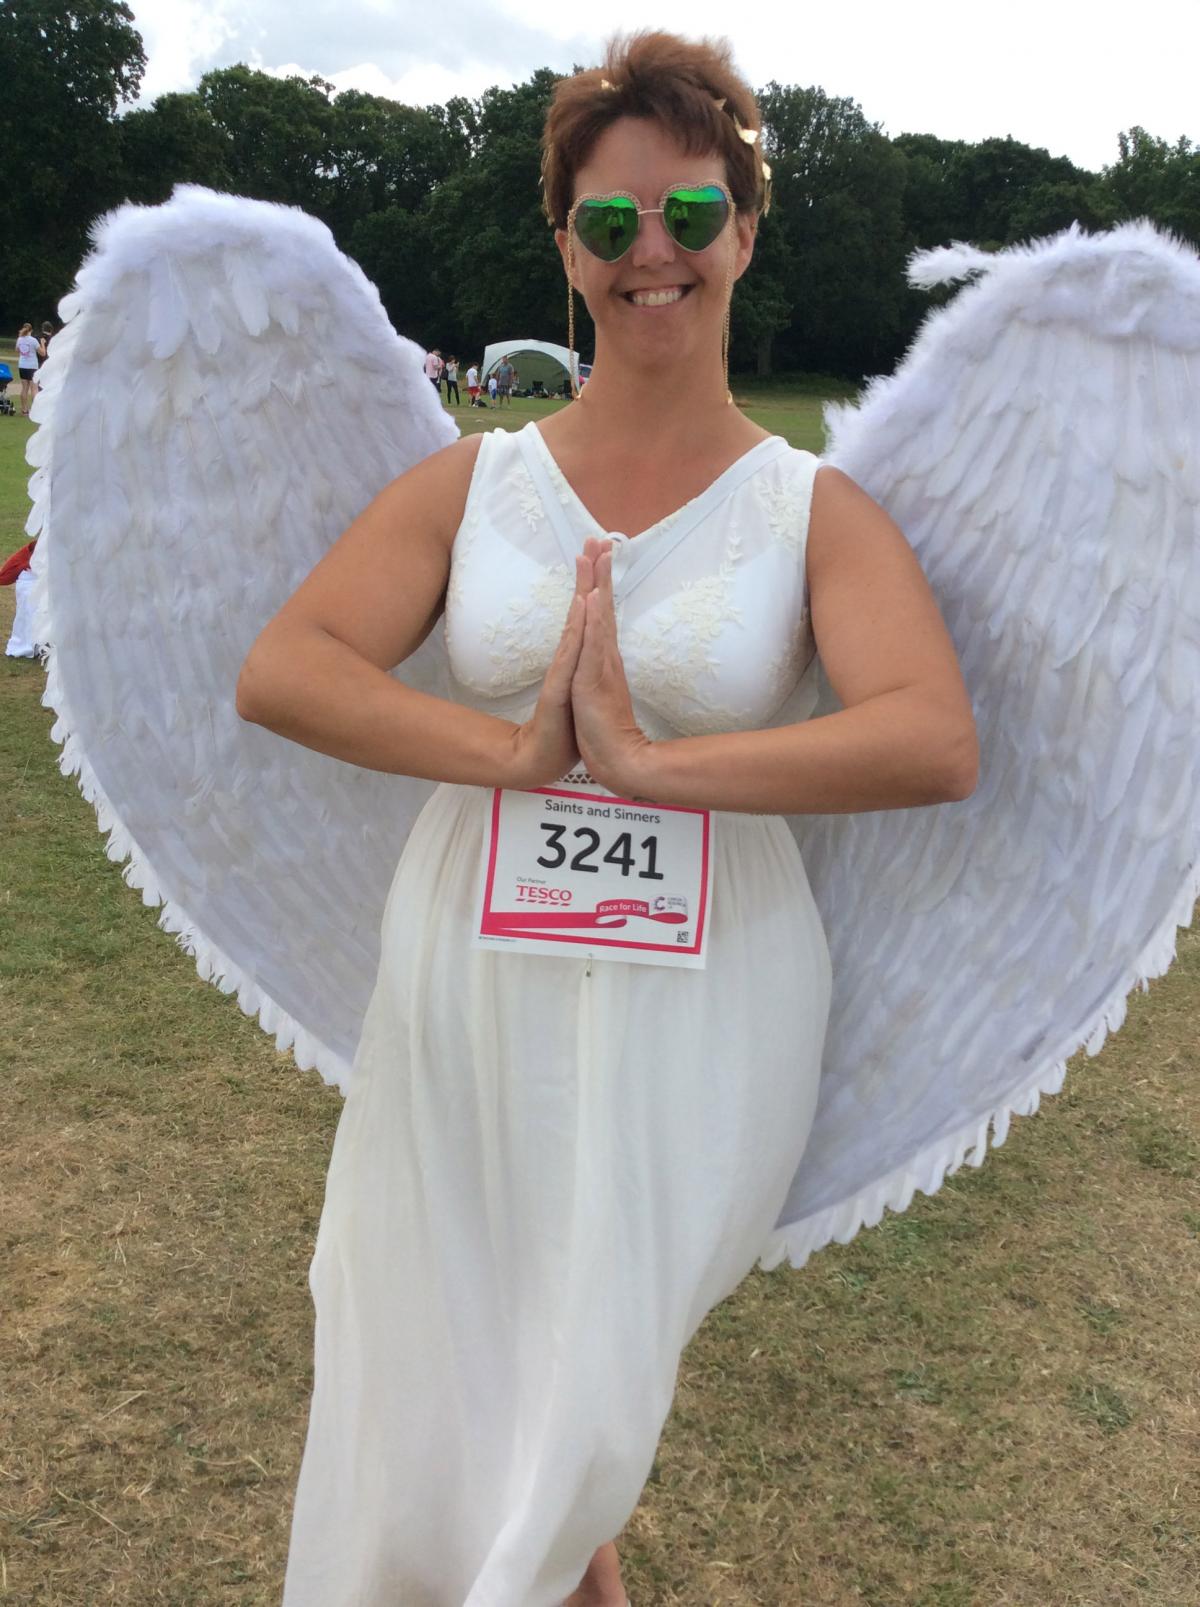 Jane Gould, 34, from Bishopstoke who is running for her lung cancer-fighting mum Sue Francis from West Wellow